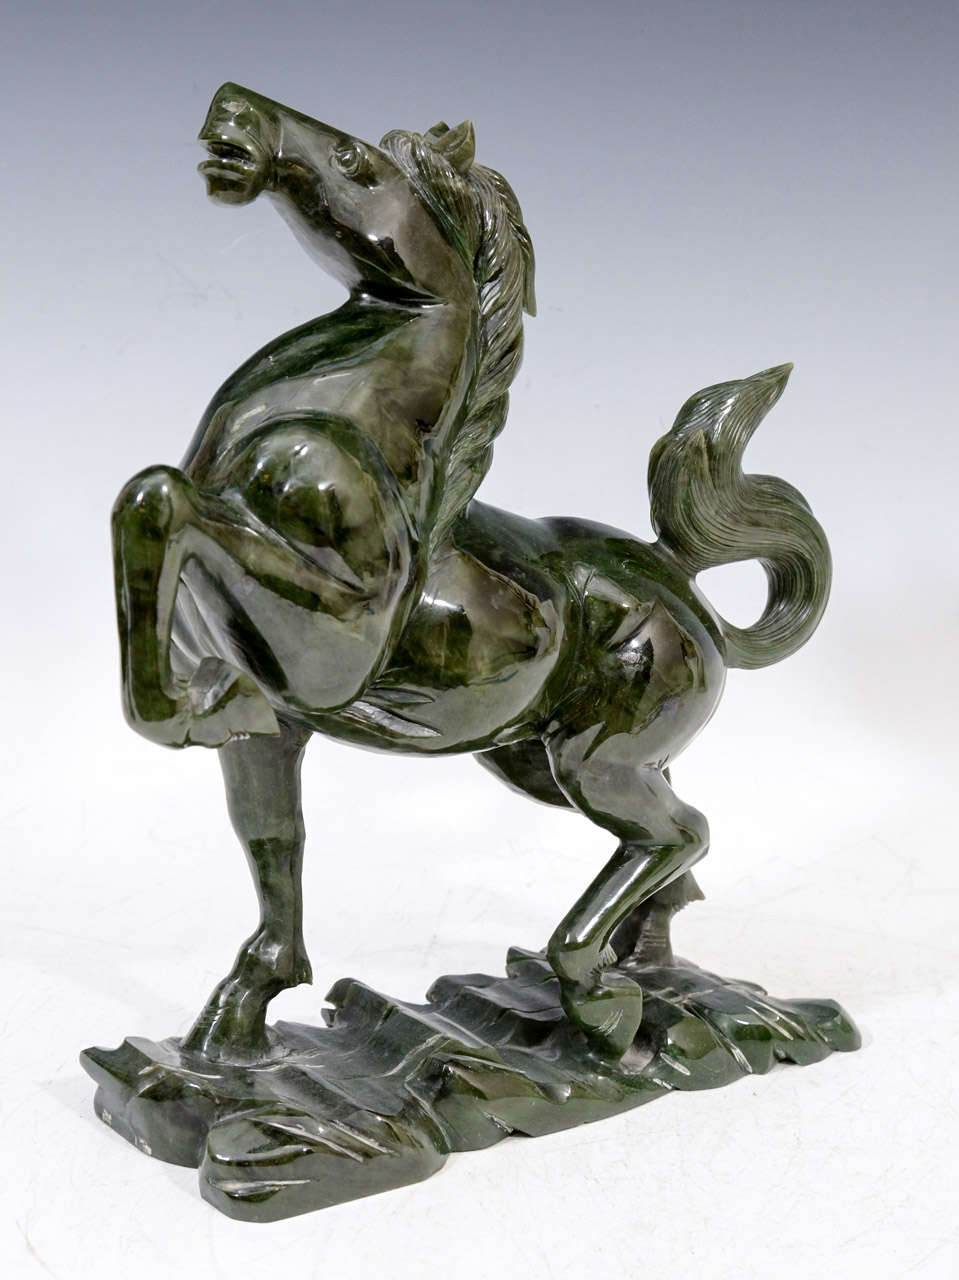 A circa 1920s jade sculpture from China, depicting a horse in mid-stride.